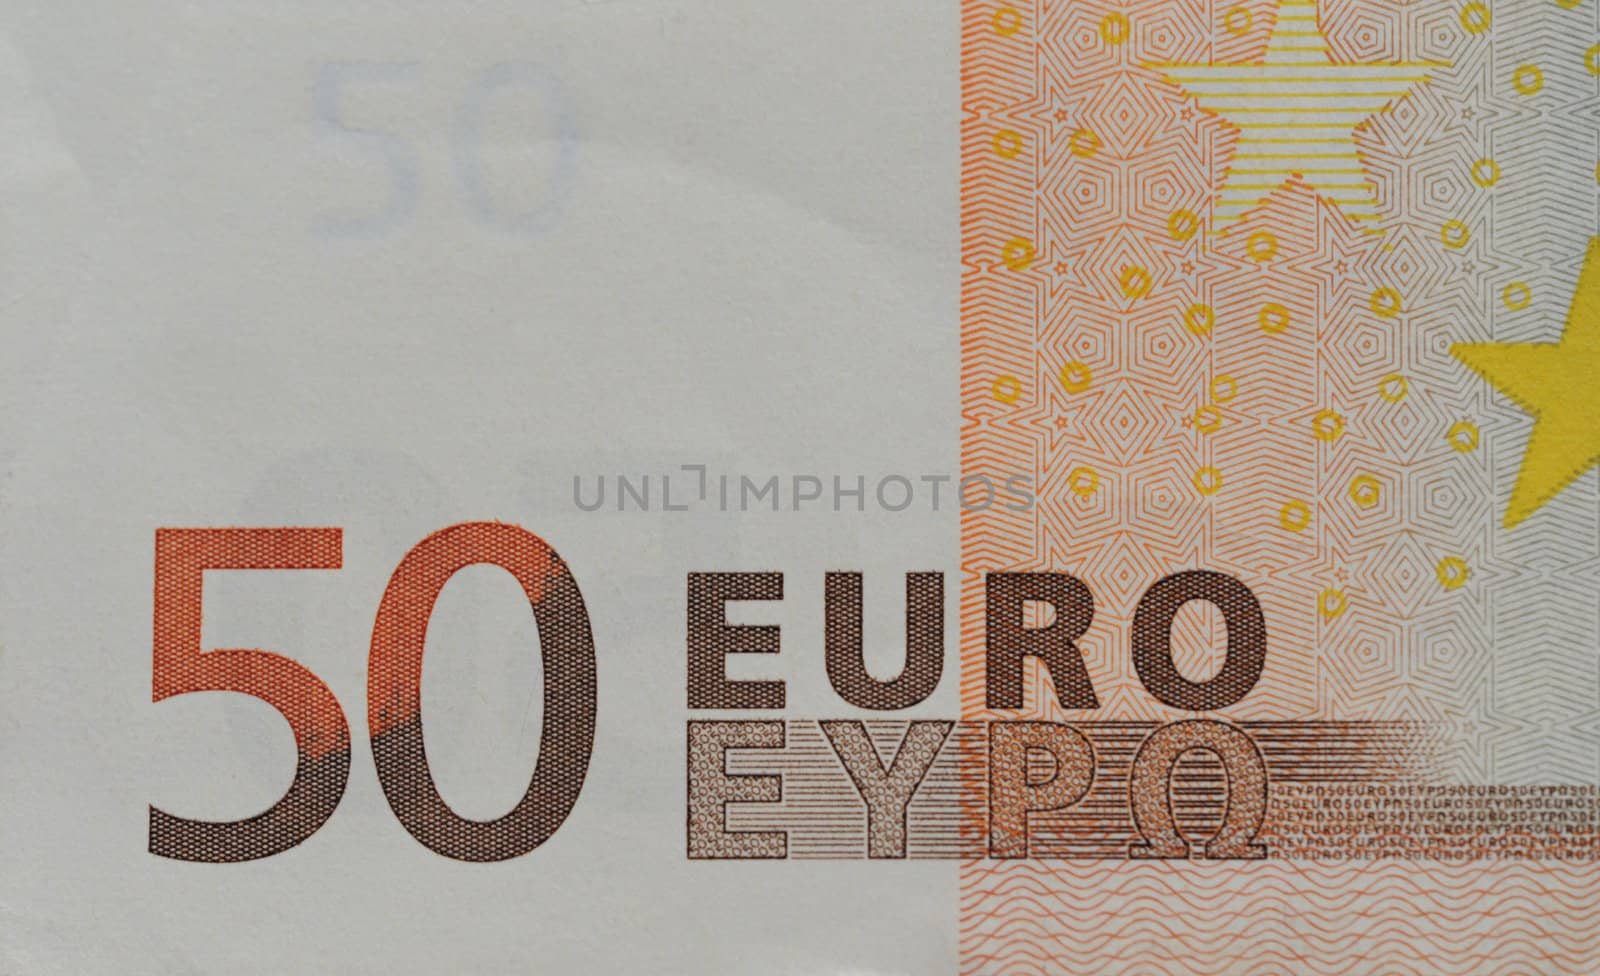 Fifty Euro. by gkuna